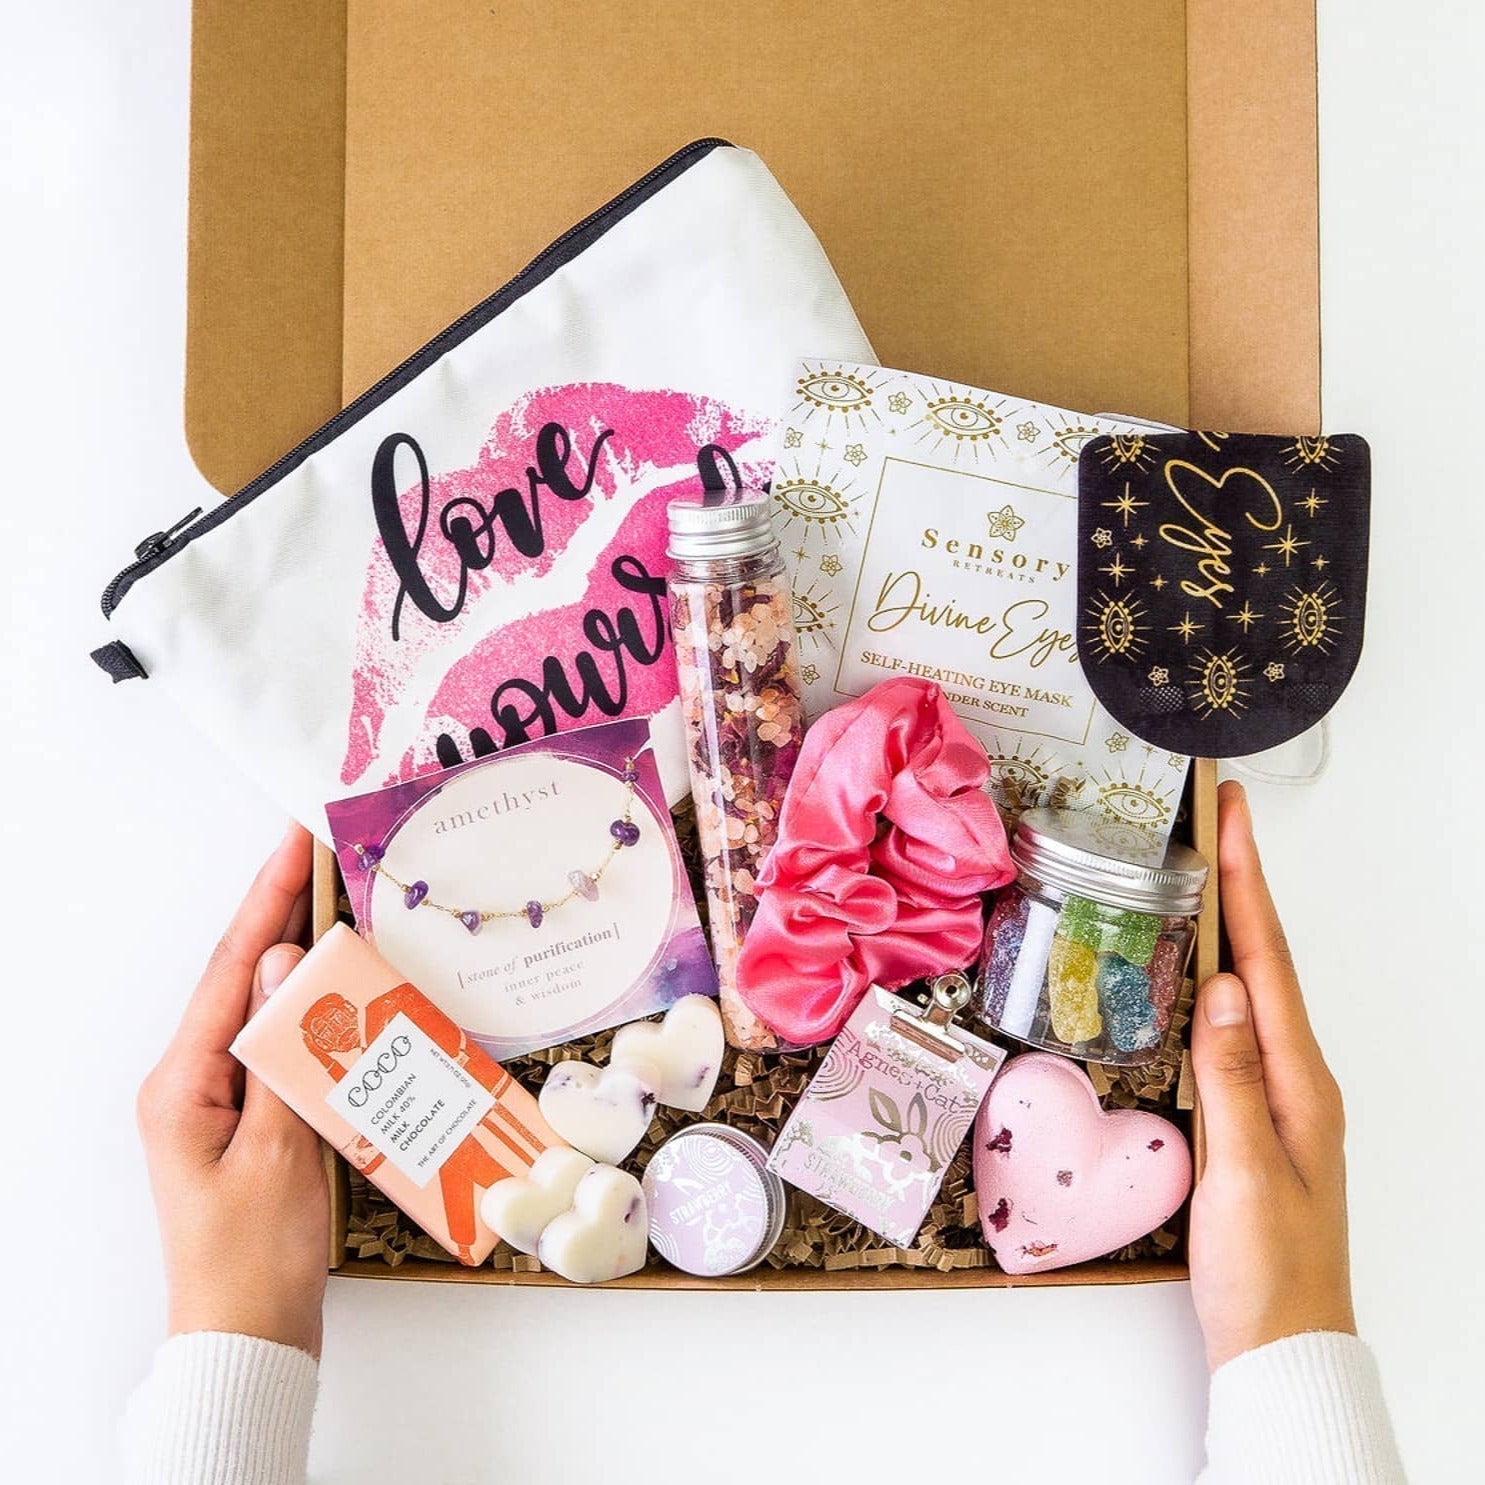 Radiance Revival Luxe Box | Thinking of You Gift